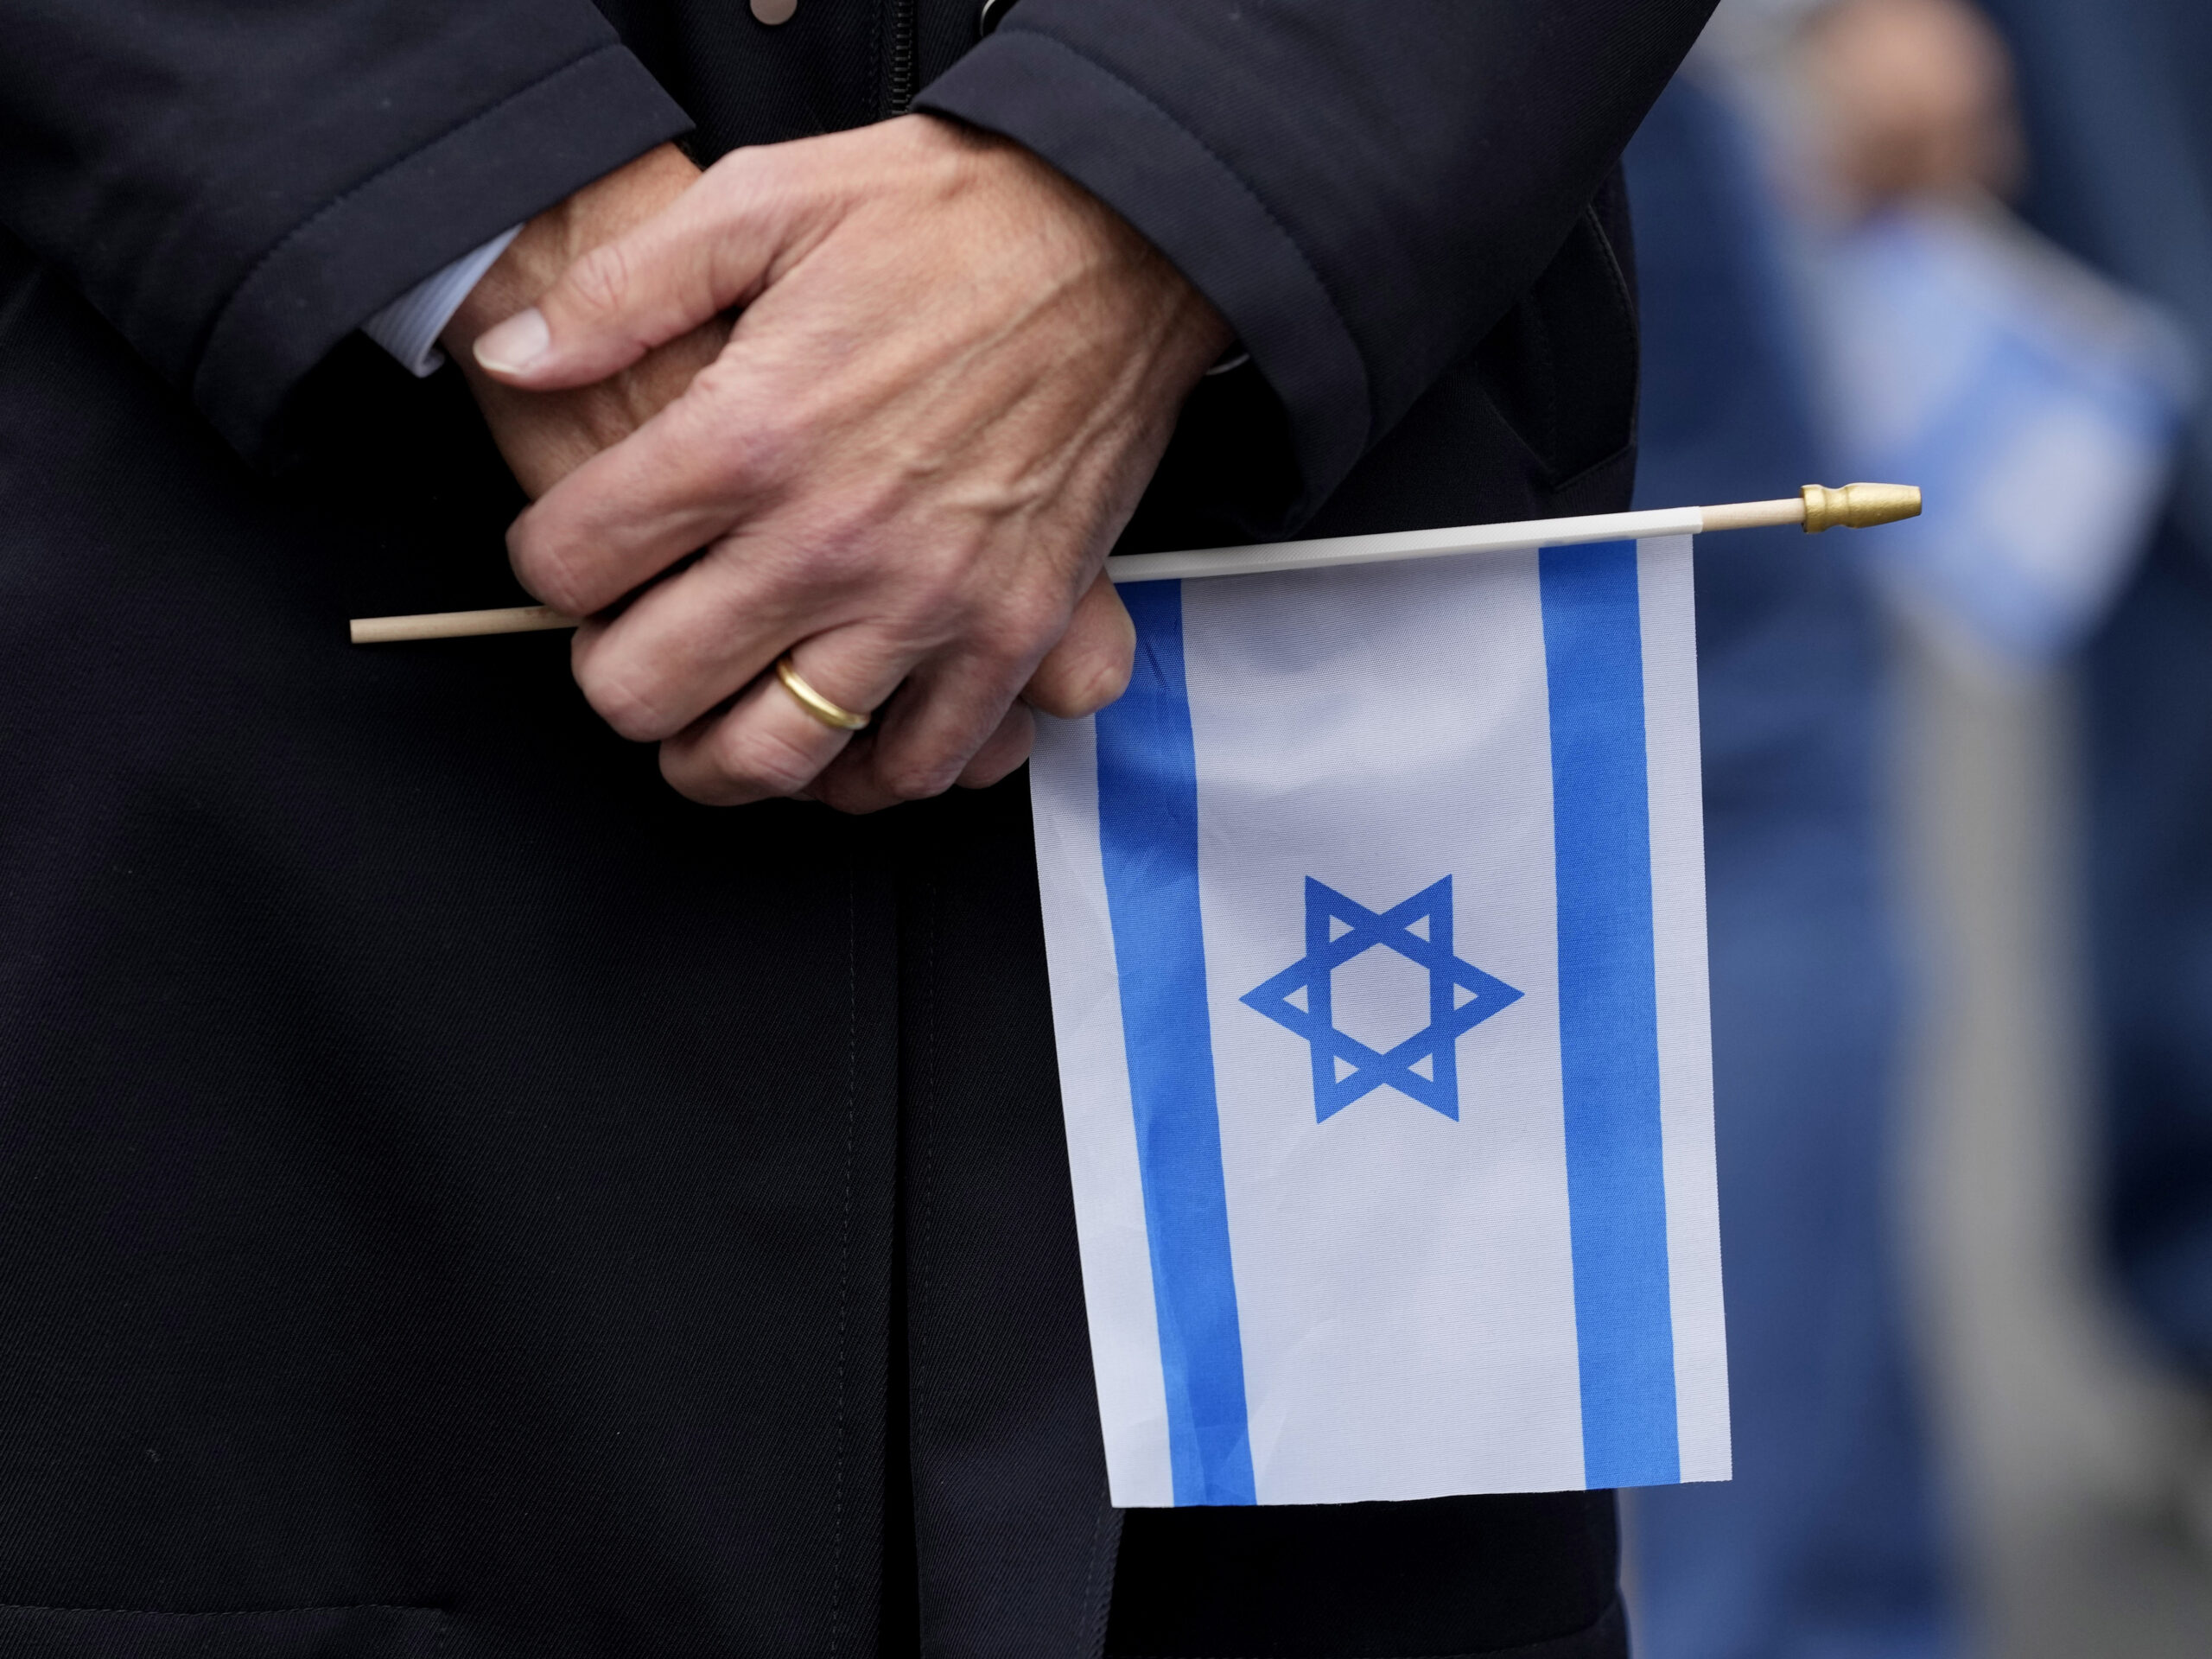 Concerns over antisemitism rise as Jews begin observing Passover